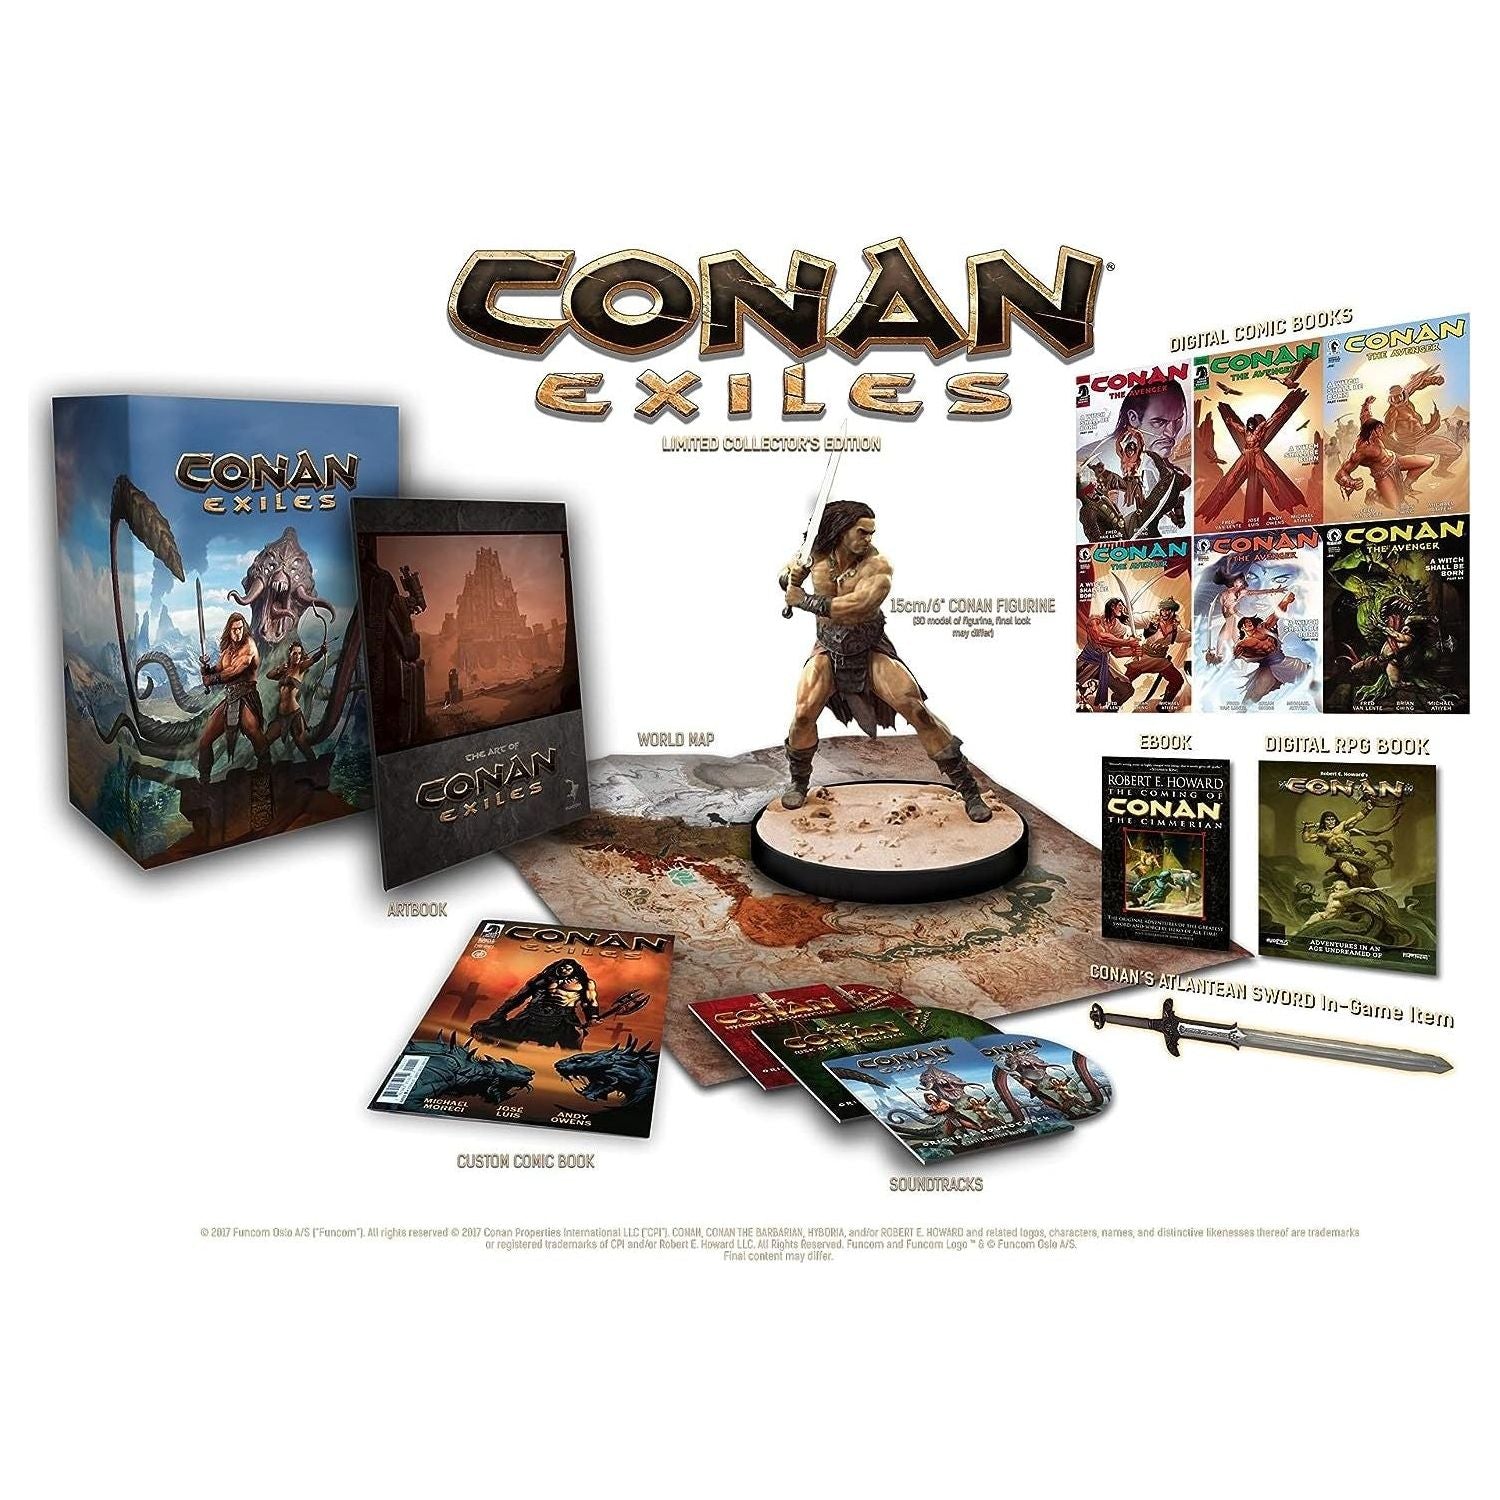 PS4 - Conan Exiles Limited Collector's Edition